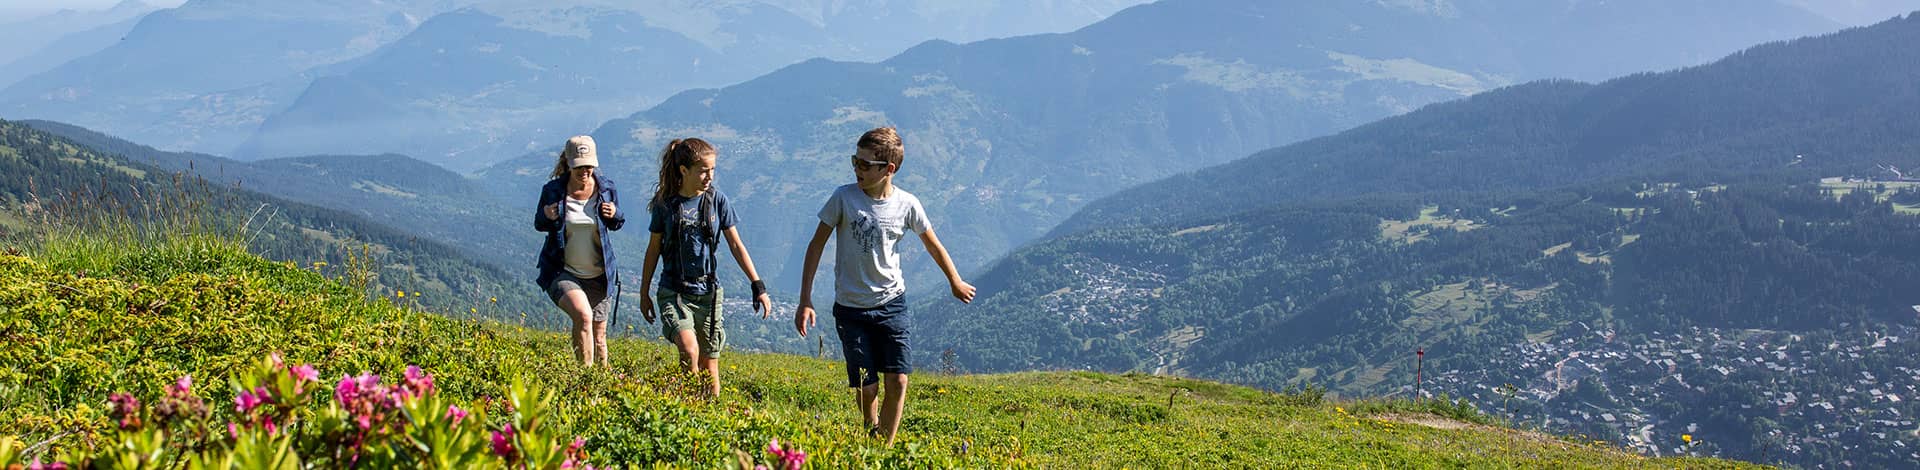 Hiking Alps in Méribel in Savoie in Les 3 Vallées, hiking routes for family holidays in summer